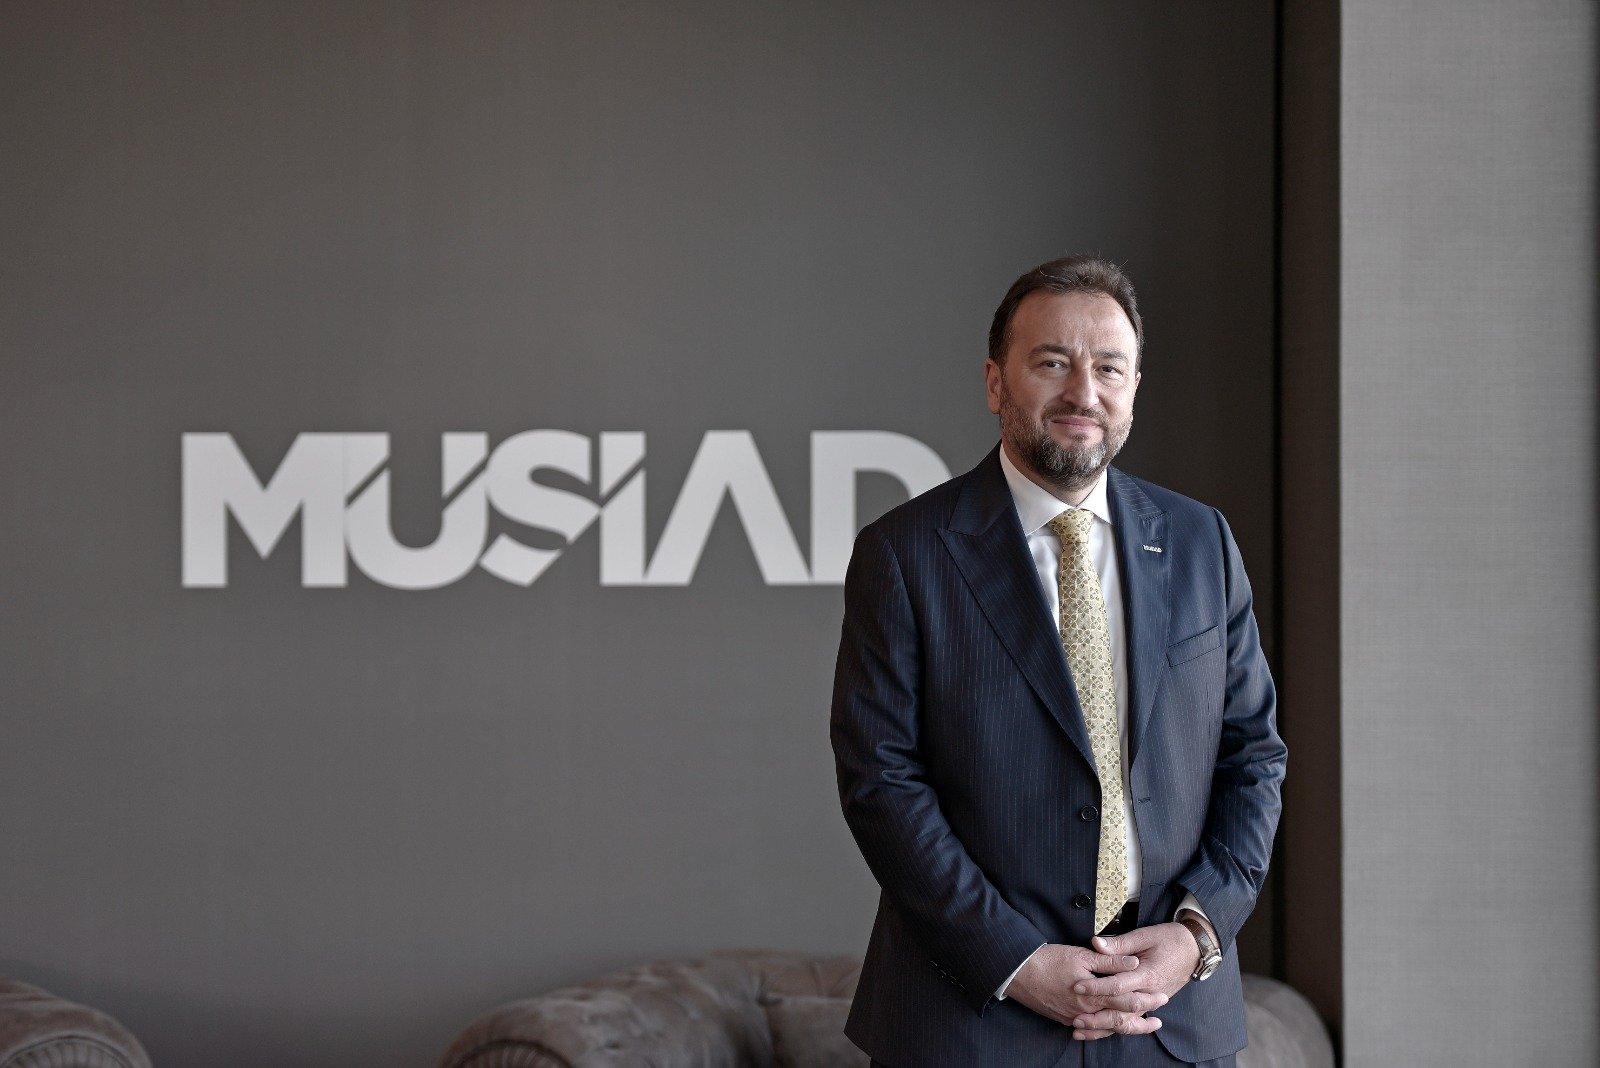 Turkish MUSIAD prepares for 19th MUSIAD EXPO trade exhibition - Turkish official